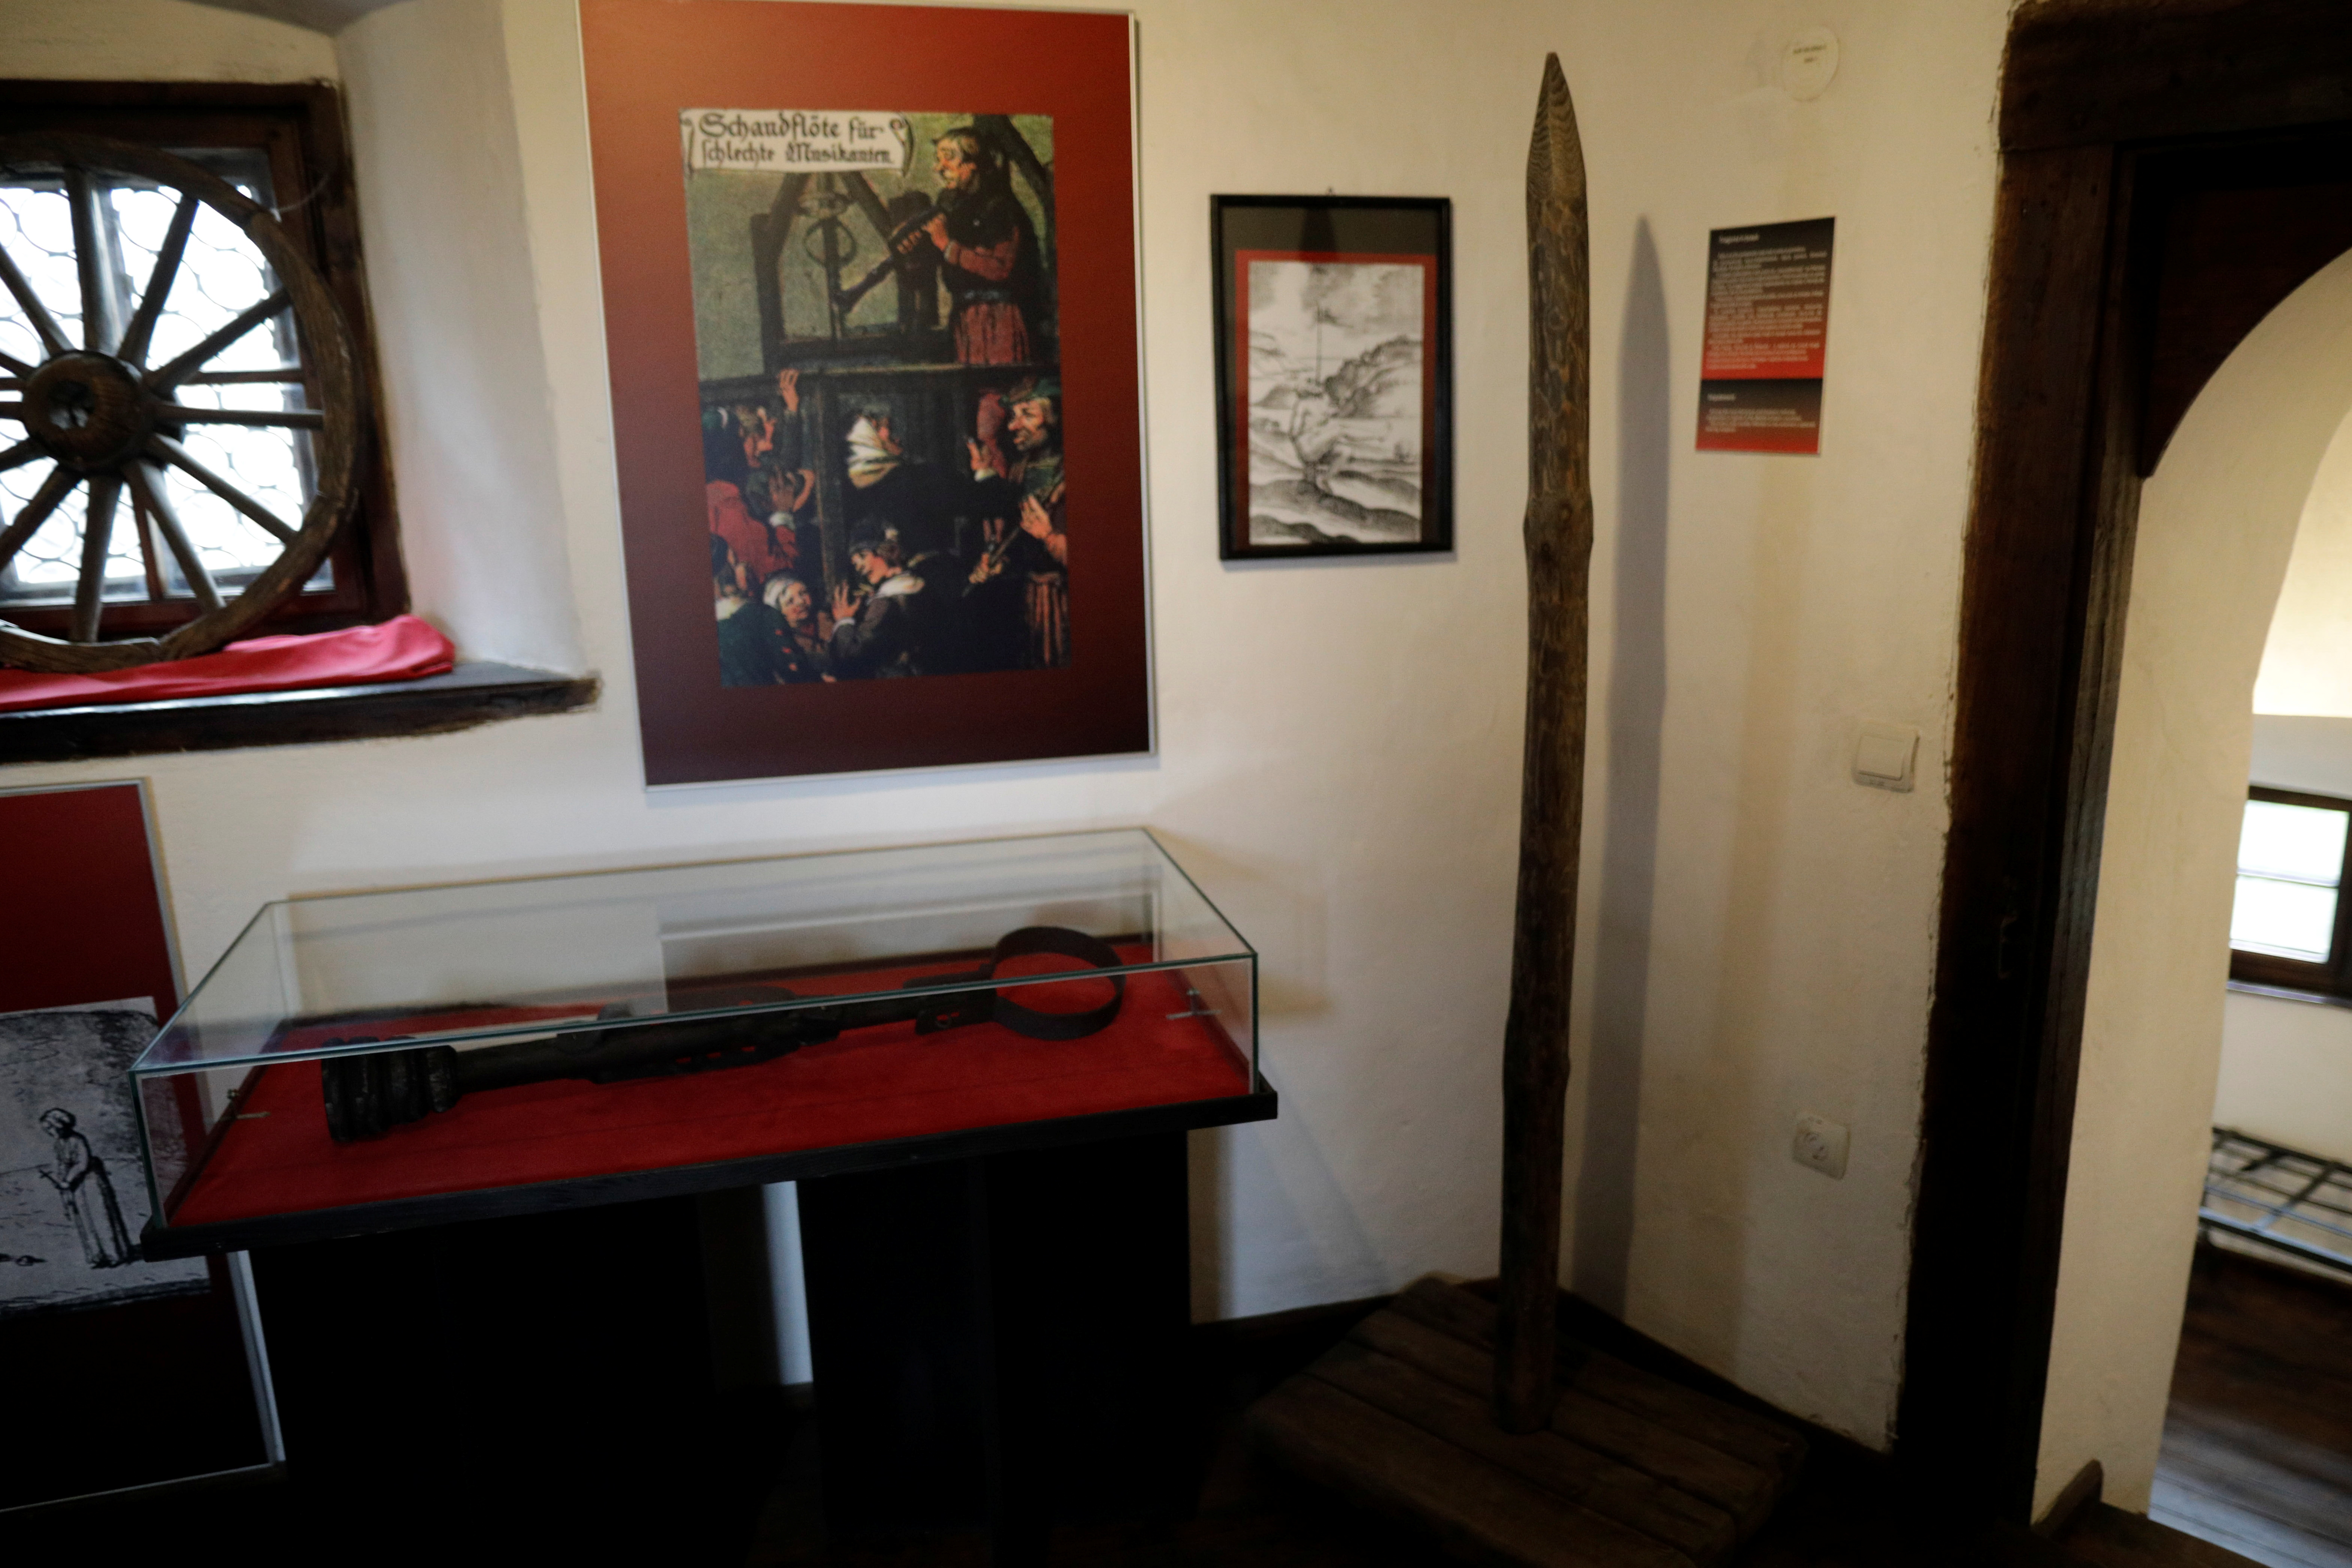 A replica of a spike, used for impaling offenders by Vlad the Impaler, is seen on display in Bran castle